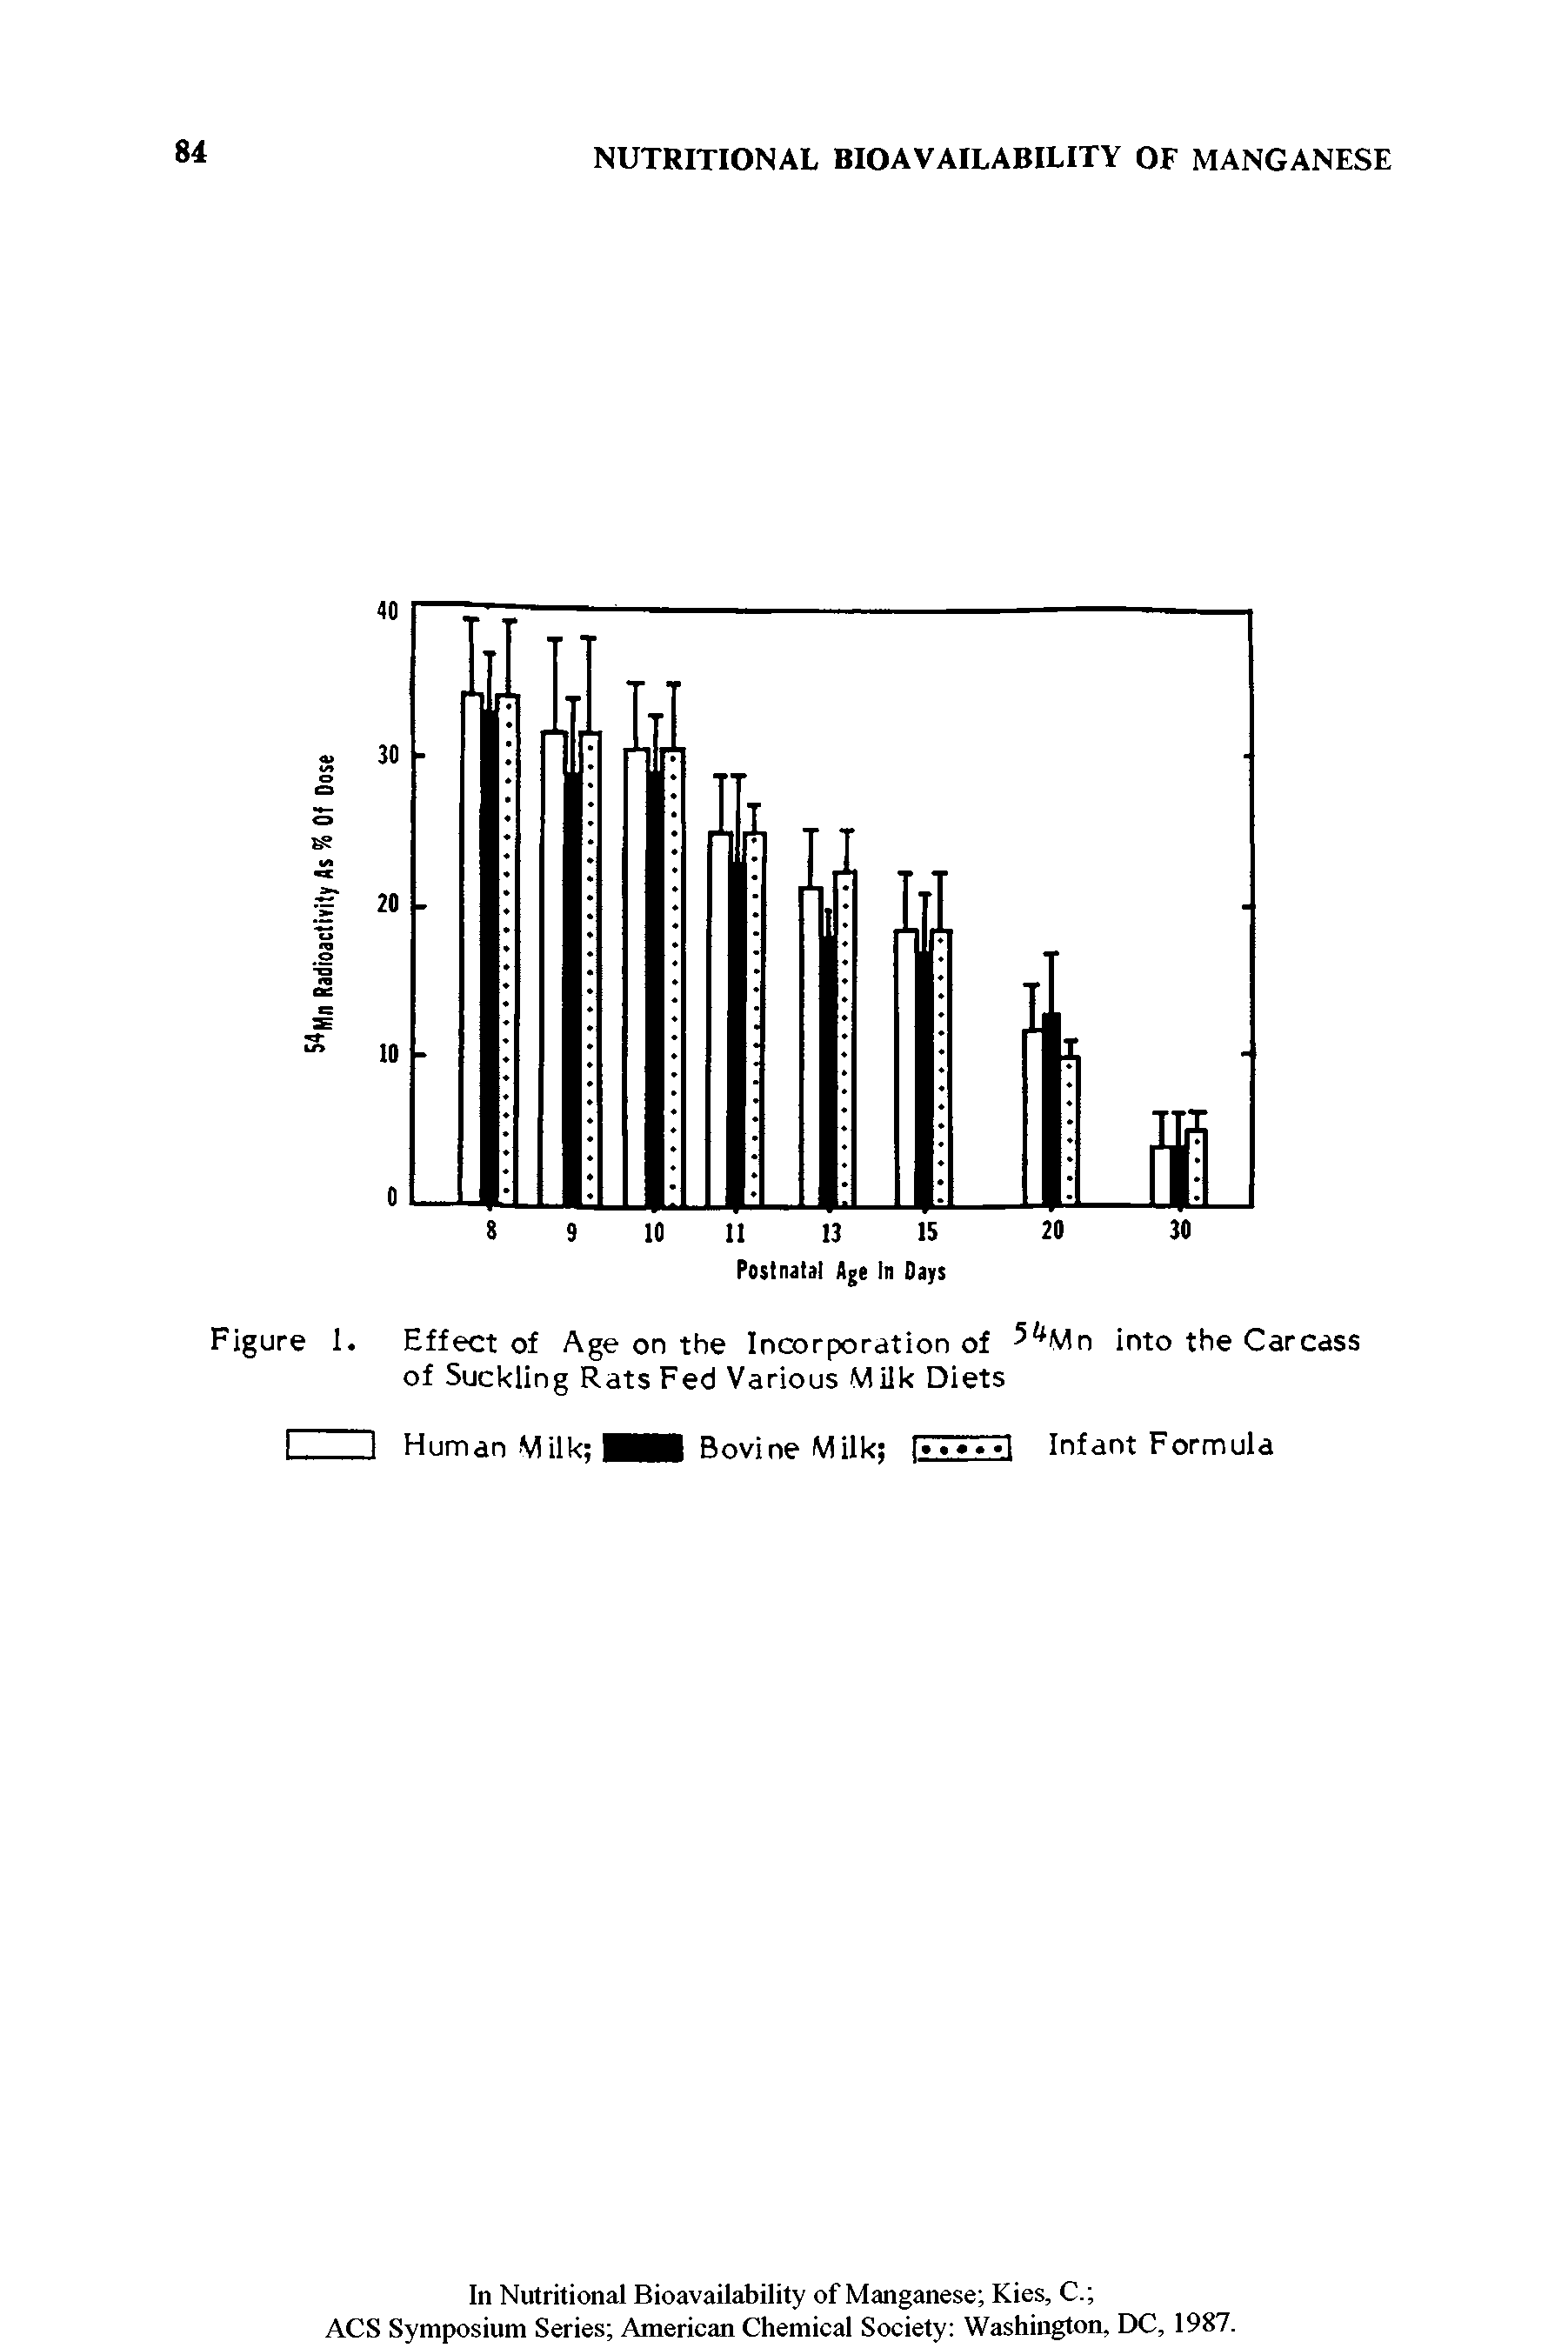 Figure 1. Effect of Age on the Incorporation of Mn into the Carcass of Suckling Rats Fed Various Milk Diets...